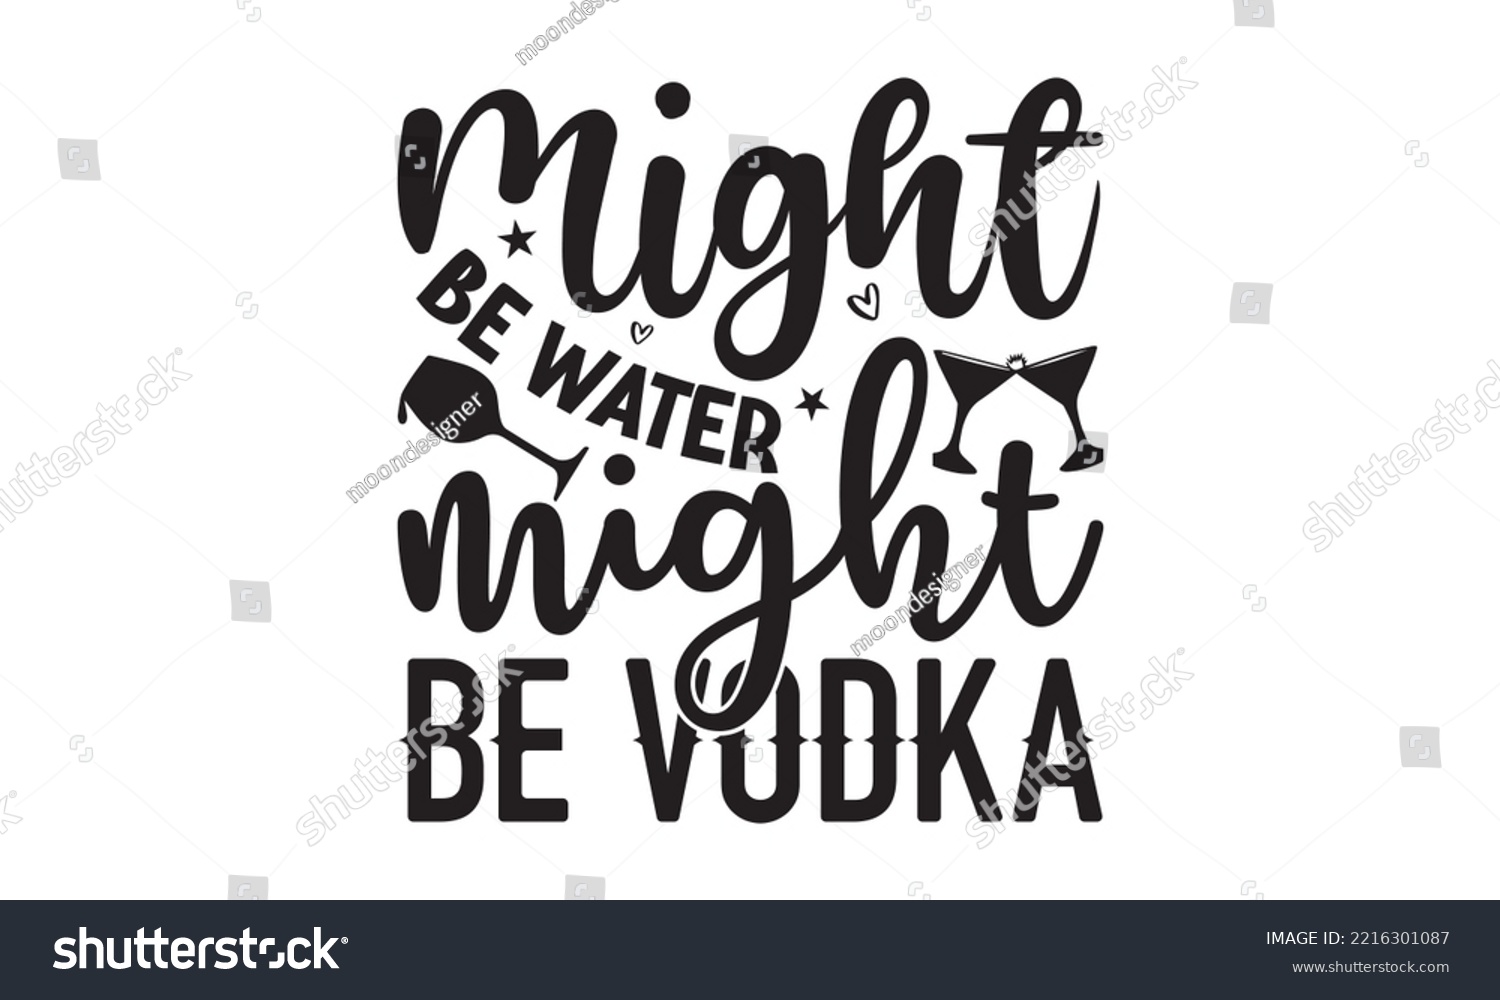 SVG of Might be water might be vodka - Alcohol SVG T Shirt design, Girl Beer Design, Prost, Pretzels and Beer, Vector EPS Editable Files, Alcohol funny quotes, Oktoberfest Alcohol SVG design,  EPS 10 svg